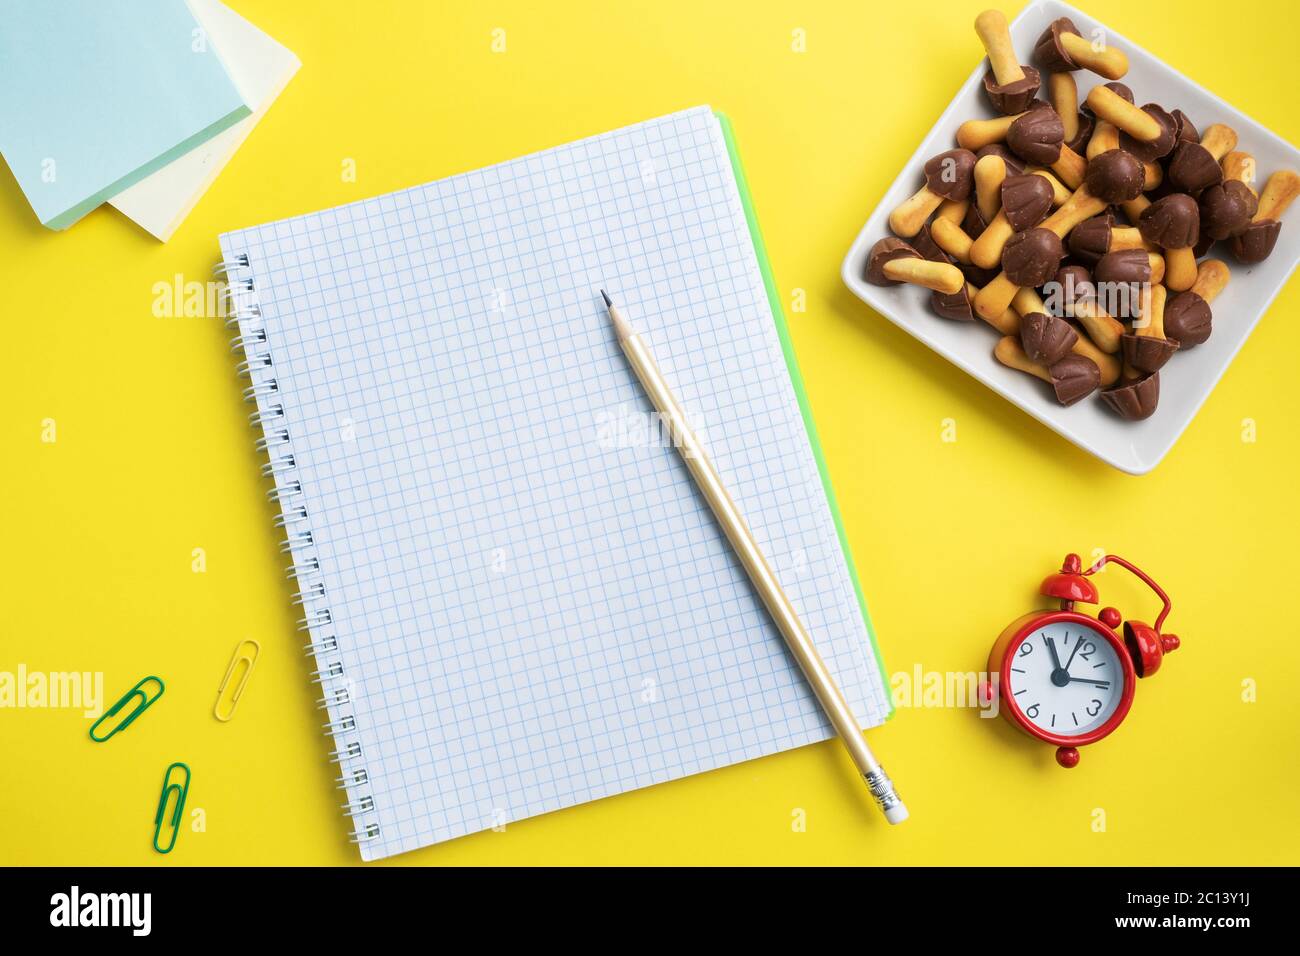 School supplies and cookies for a snack on the yellow table with copy space. concept school, Stock Photo